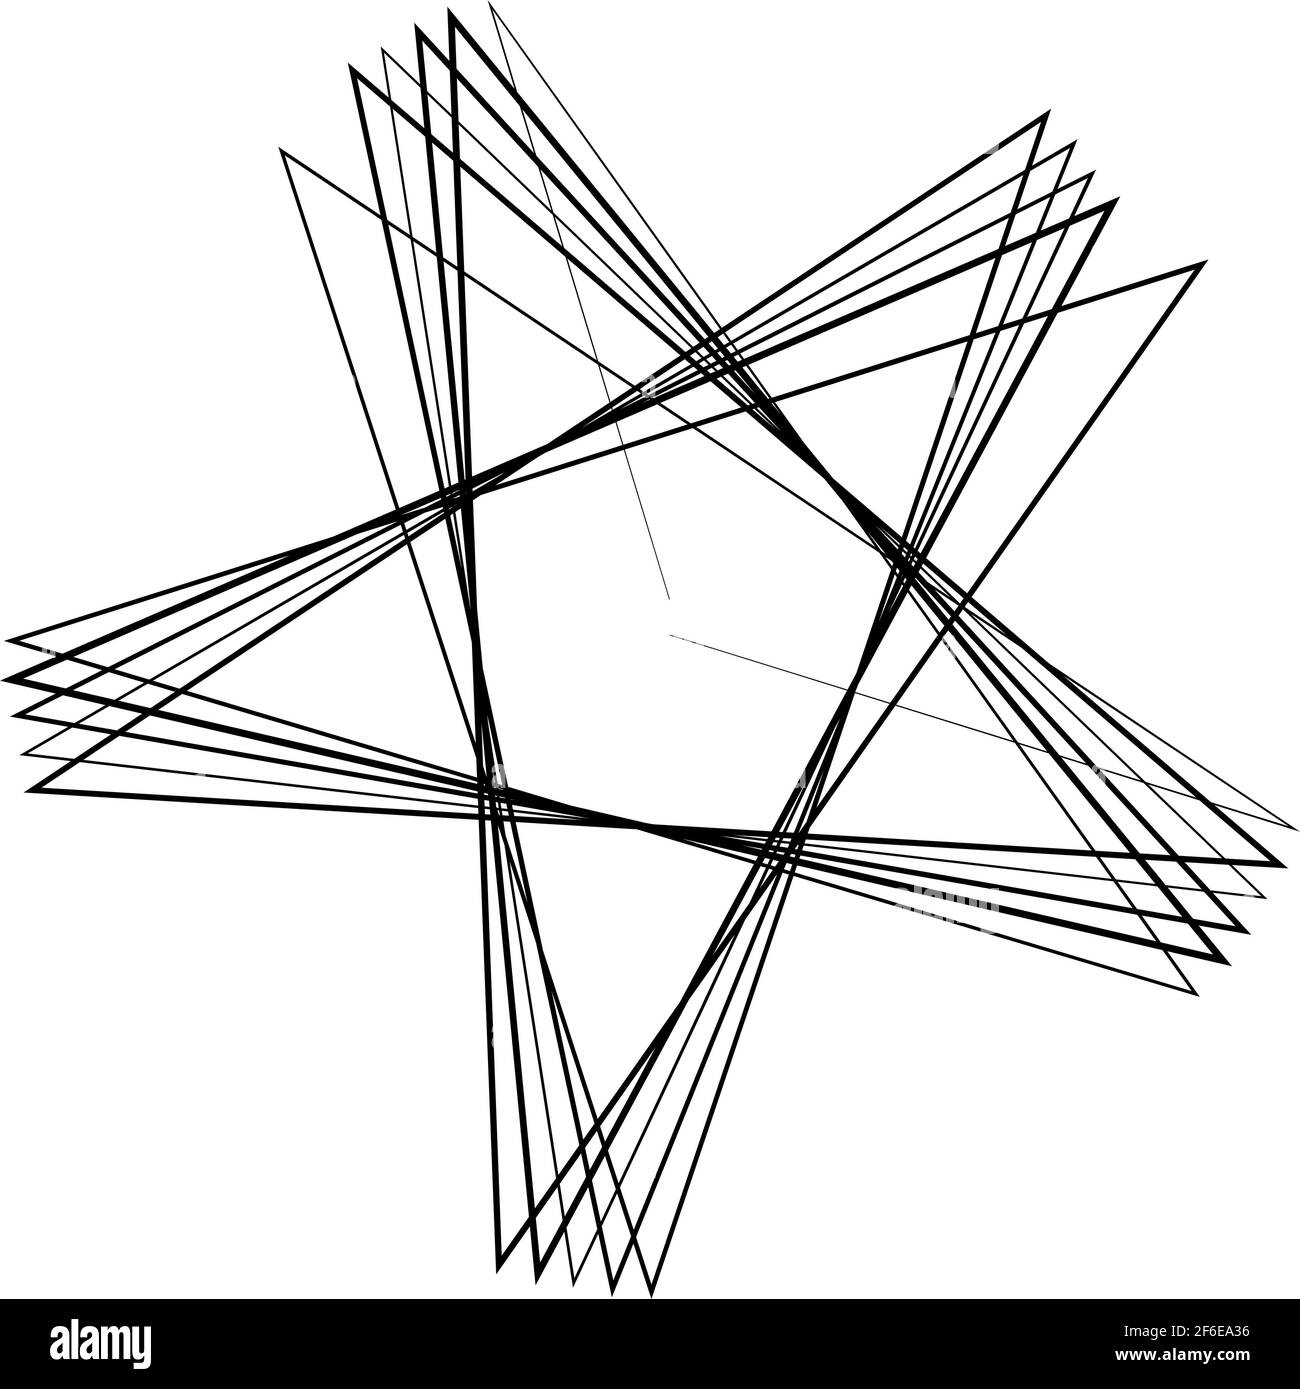 Abstract edgy, geometric line art. Angular random, chaotic lines. Spiky. tapered chaotic art. Irregular artistic element Stock Vector